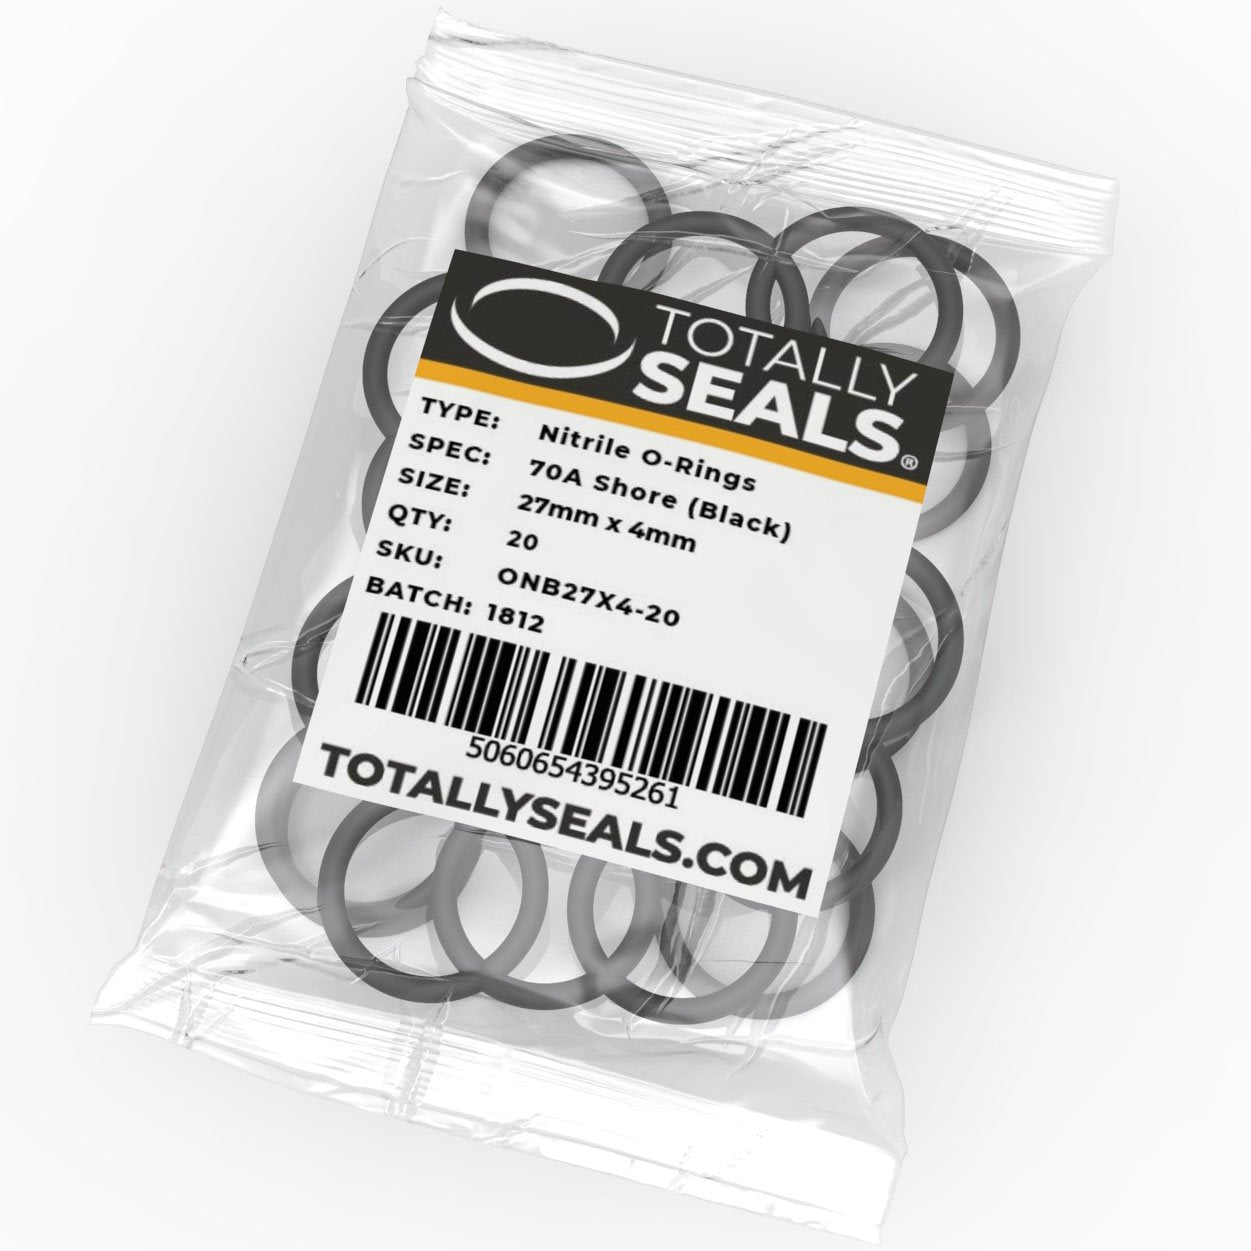 27mm x 4mm (35mm OD) Nitrile O-Rings - Totally Seals®